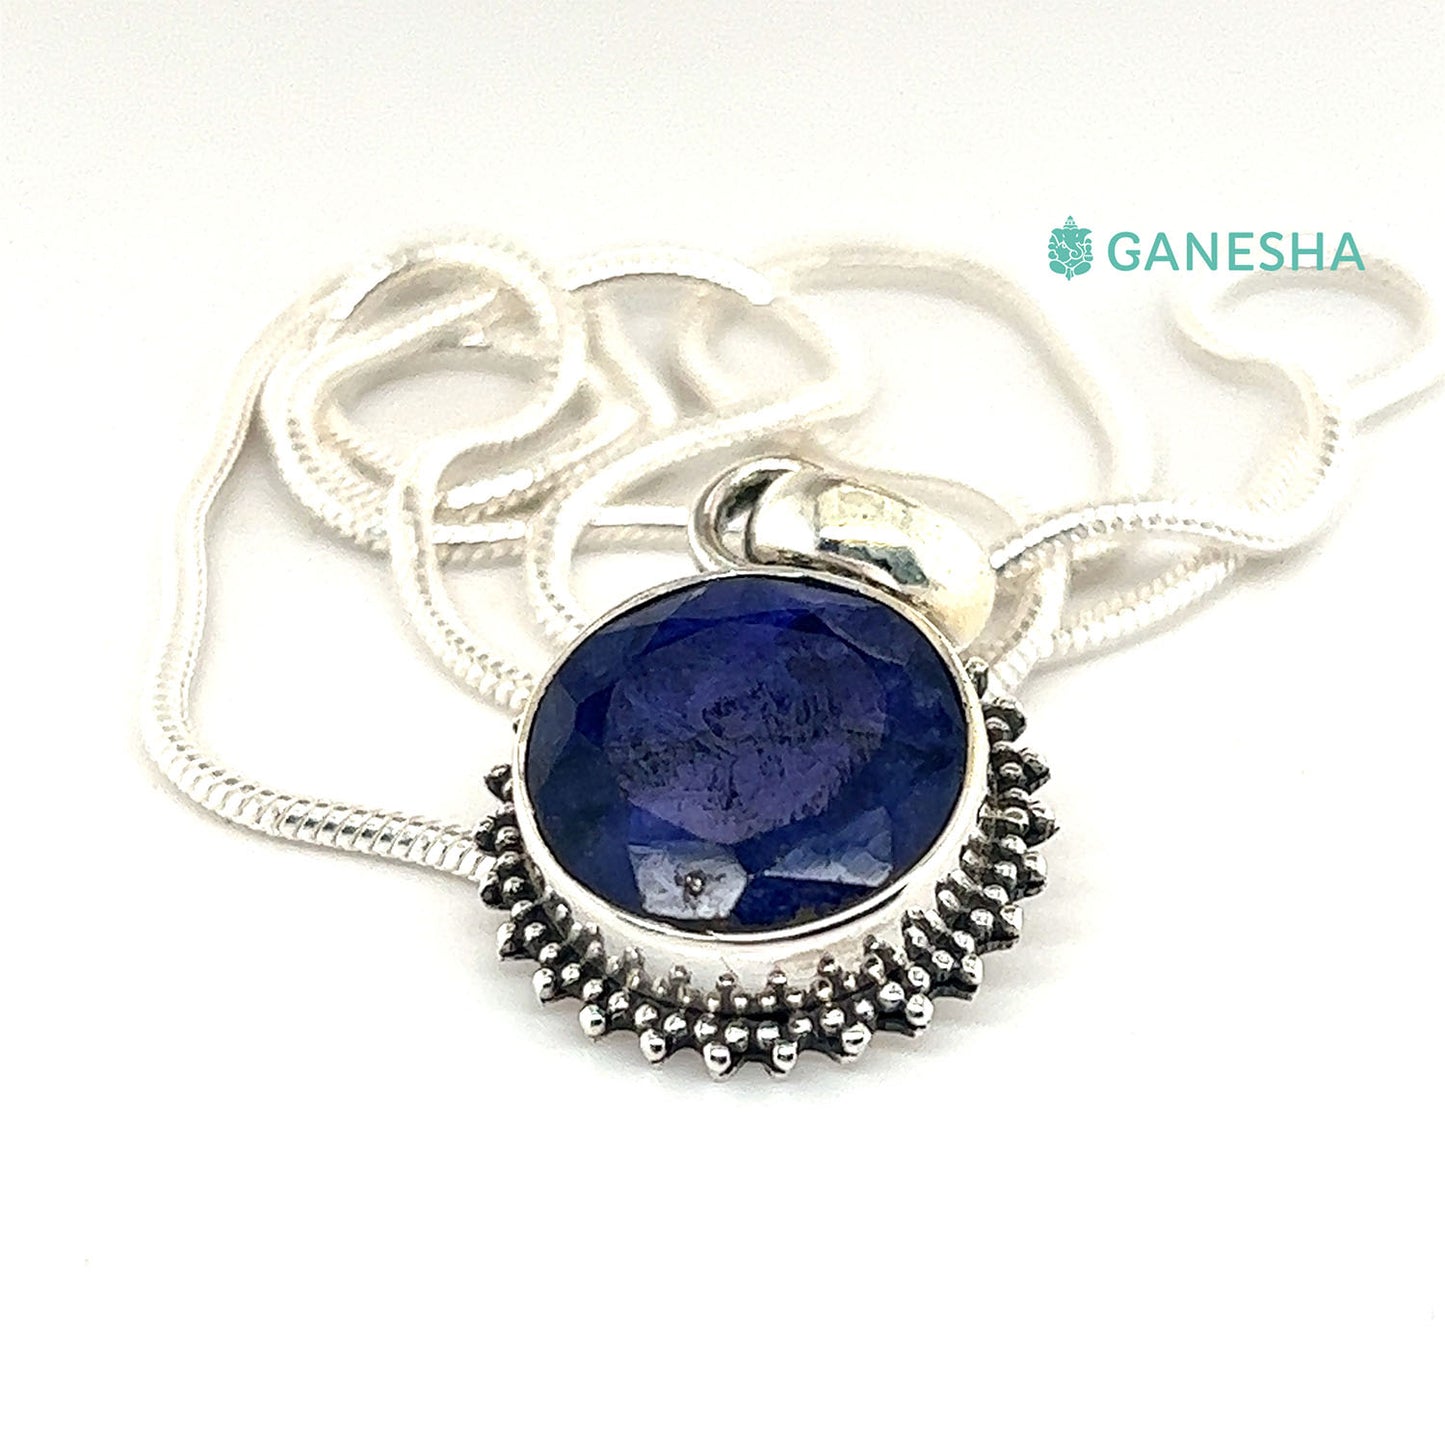 Ganesha Handicrafts, Blue Sapphire-925 Sterling Silver Jewellery Gift set with Chain, Blue Sapphire-925 Sterling Silver Jewellery Gift set with Chain, 925 Sterling Silver Jewellery Gift set with Chain, Blue Sapphire Sterling Silver Jewellery Gift set with Chain, Women's Fashion Sterling Silver Jewellery .